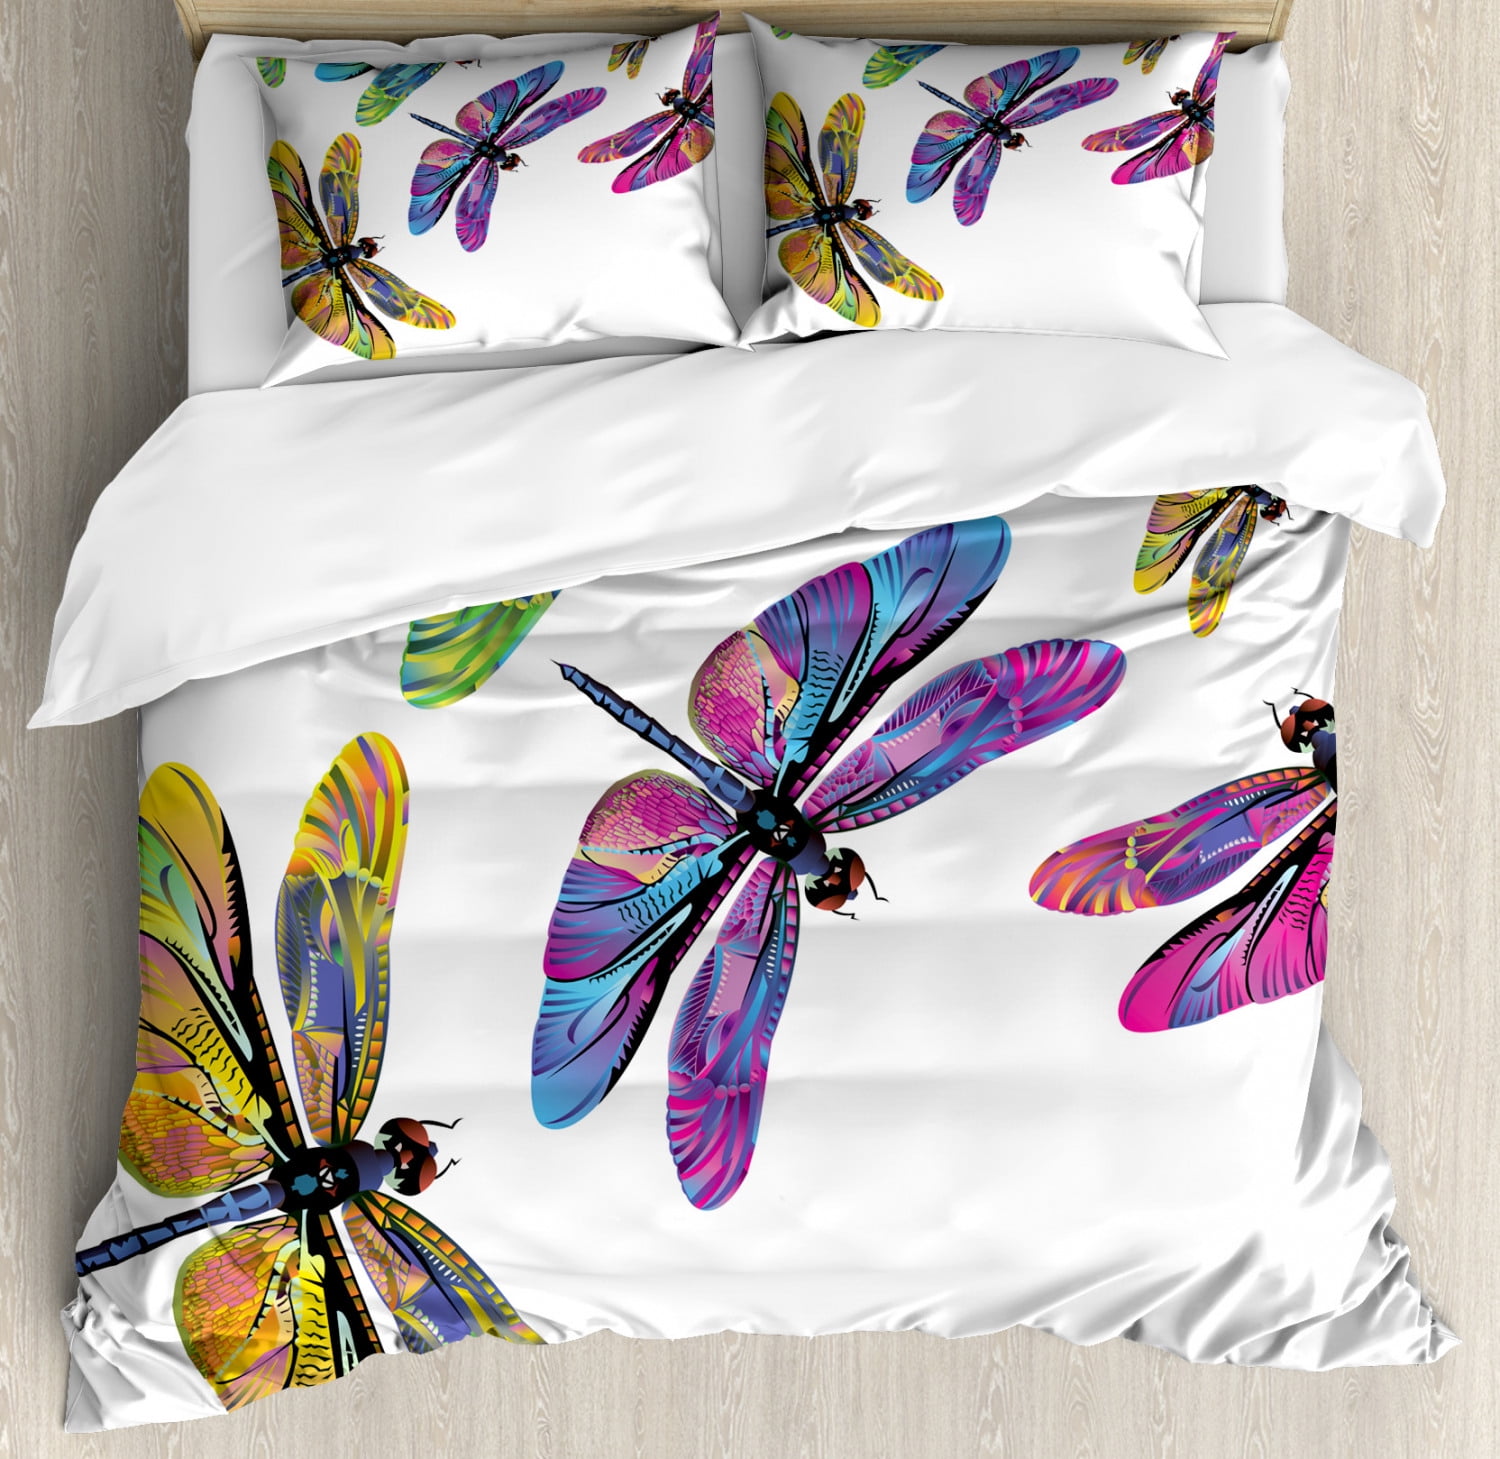 Dragonfly Queen Size Duvet Cover Set Sixties Inspired Colorful Wings Spring Woodland Animals Pattern Wildlife Elements Decorative 3 Piece Bedding Set With 2 Pillow Shams Multicolor By Ambesonne Walmart Com Walmart Com